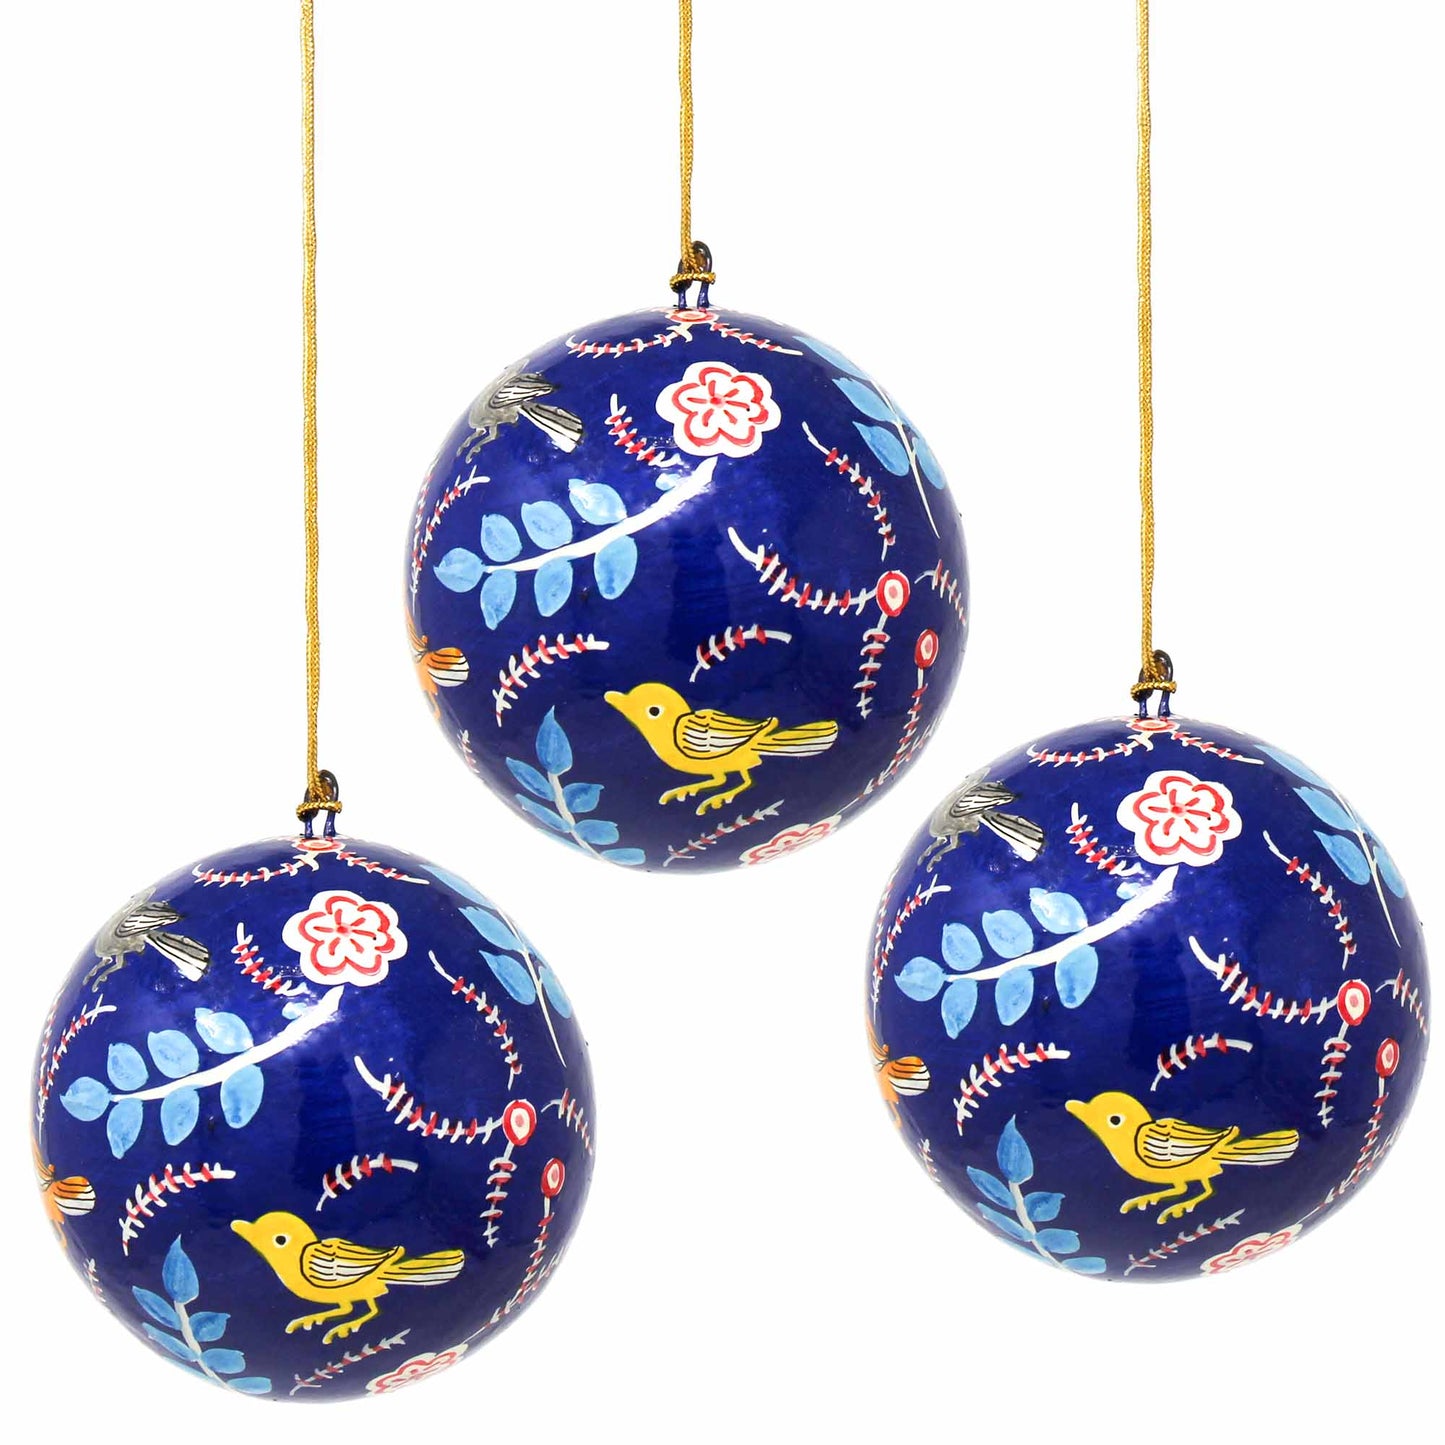 Handpainted Ornament Birds and Flowers, Blue - Pack of 3